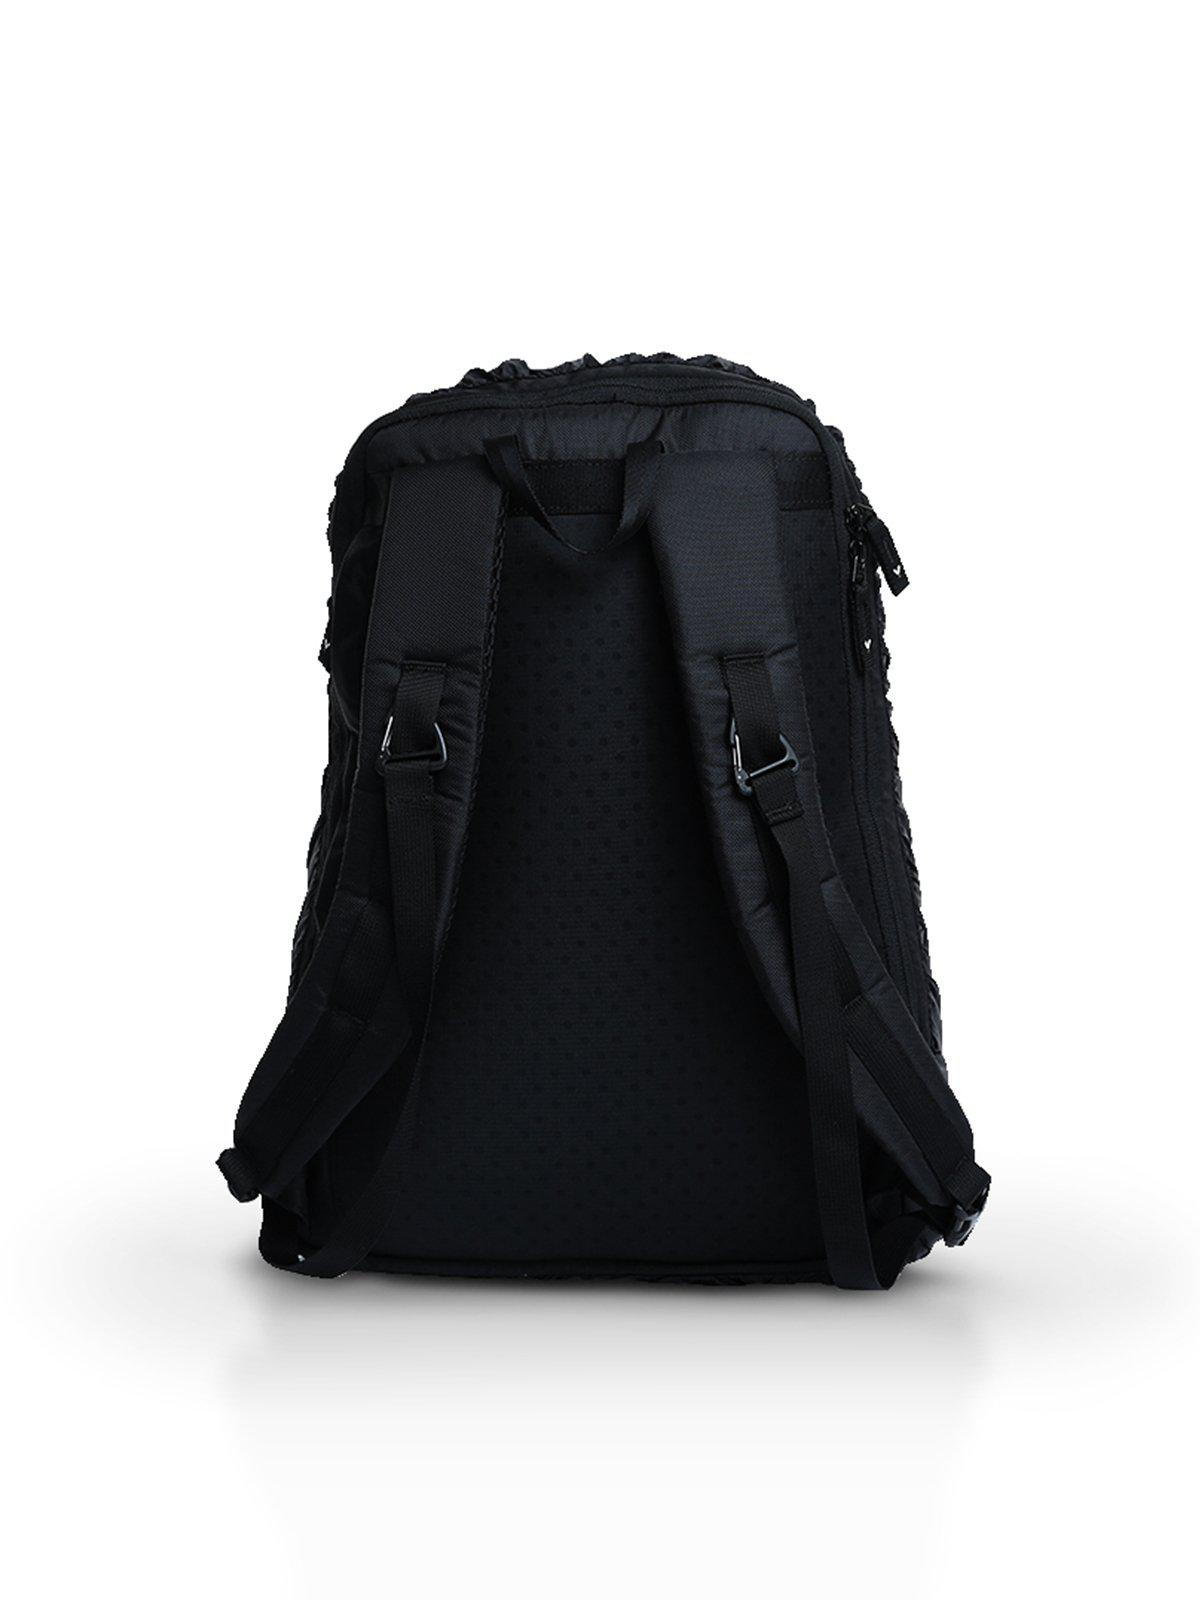 Outside Hilo Backpack Black - MORE by Morello Indonesia